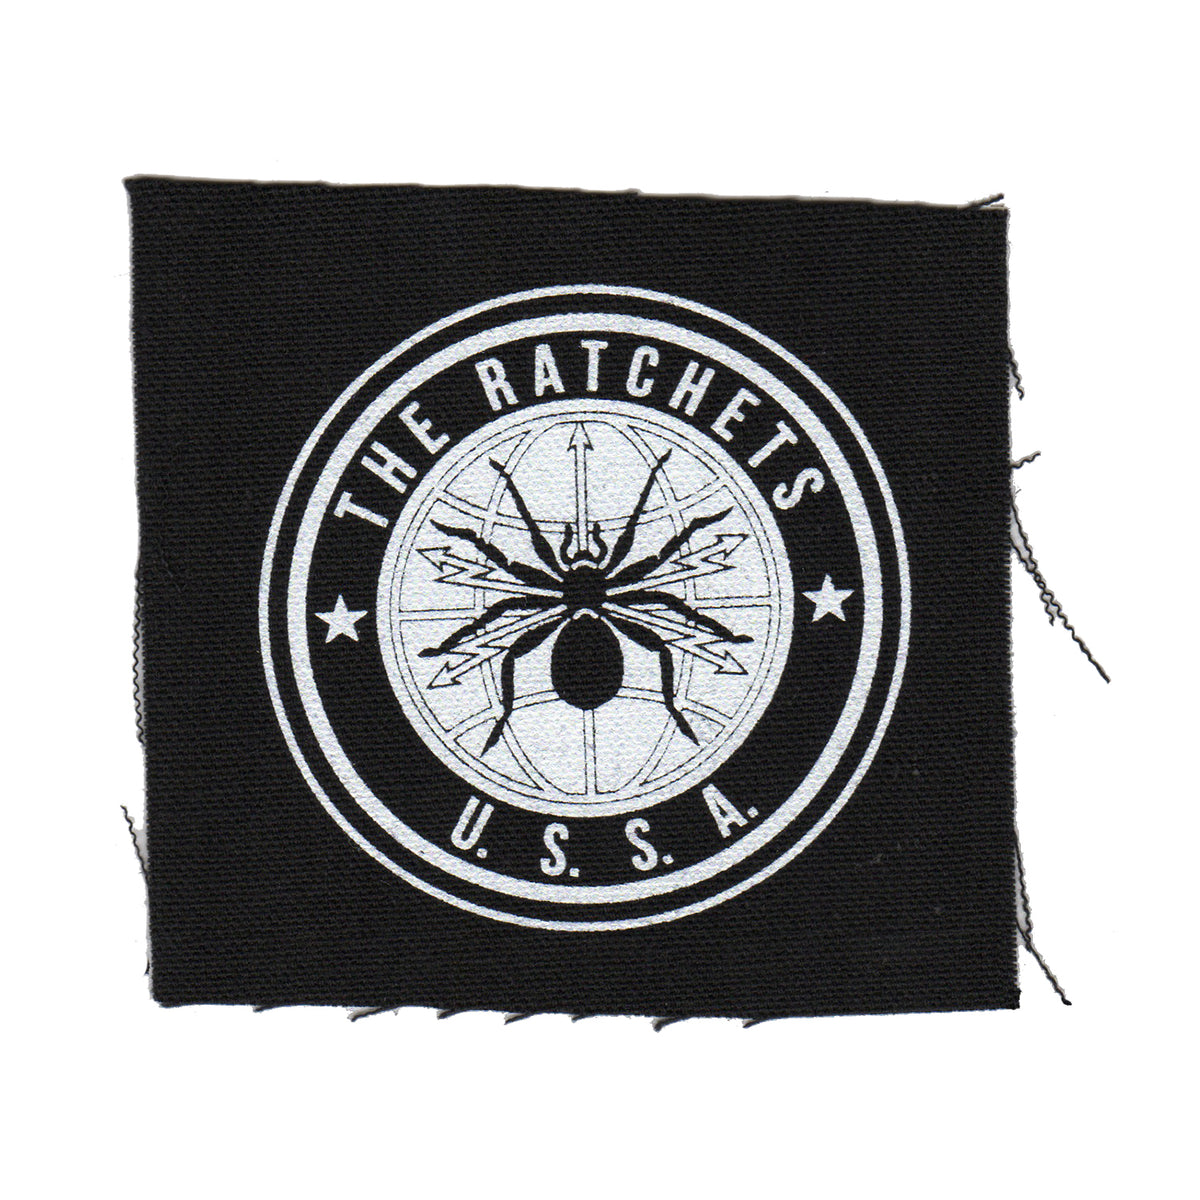 The Ratchets - Spider - Black - Patch - Cloth - Screenprinted - 4&quot; x 4&quot;